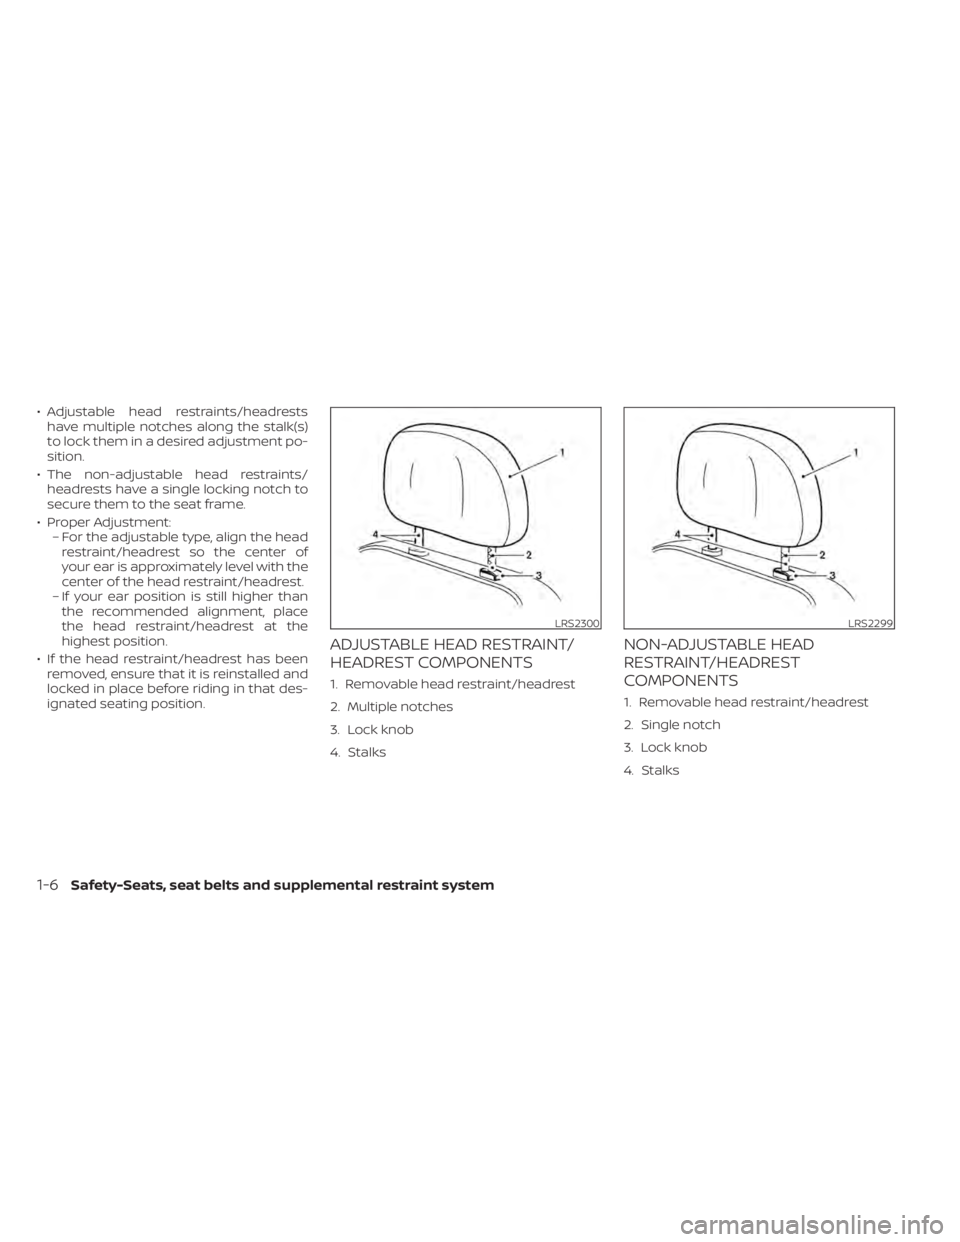 NISSAN KICKS 2021  Owners Manual • Adjustable head restraints/headrestshave multiple notches along the stalk(s)
to lock them in a desired adjustment po-
sition.
• The non-adjustable head restraints/ headrests have a single lockin